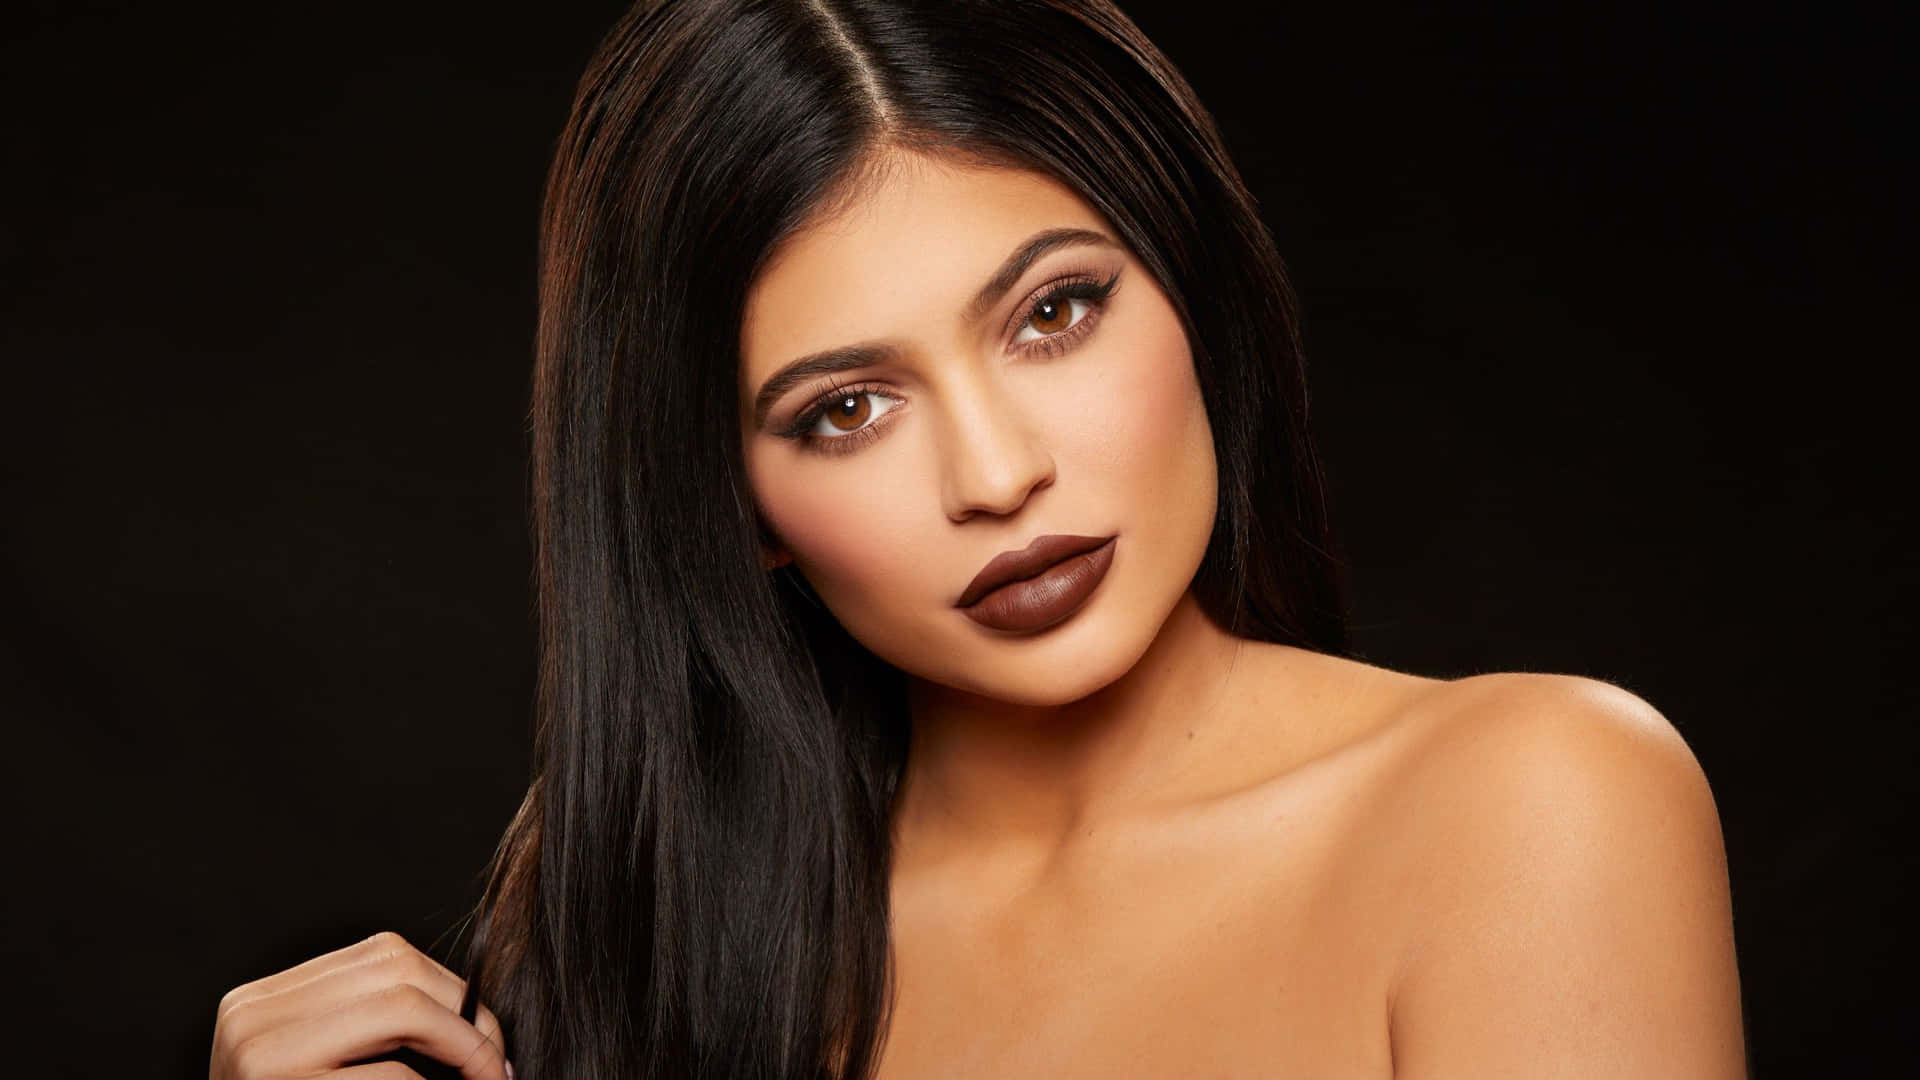 Kylie Jenner flaunting brown hair and a some serious style